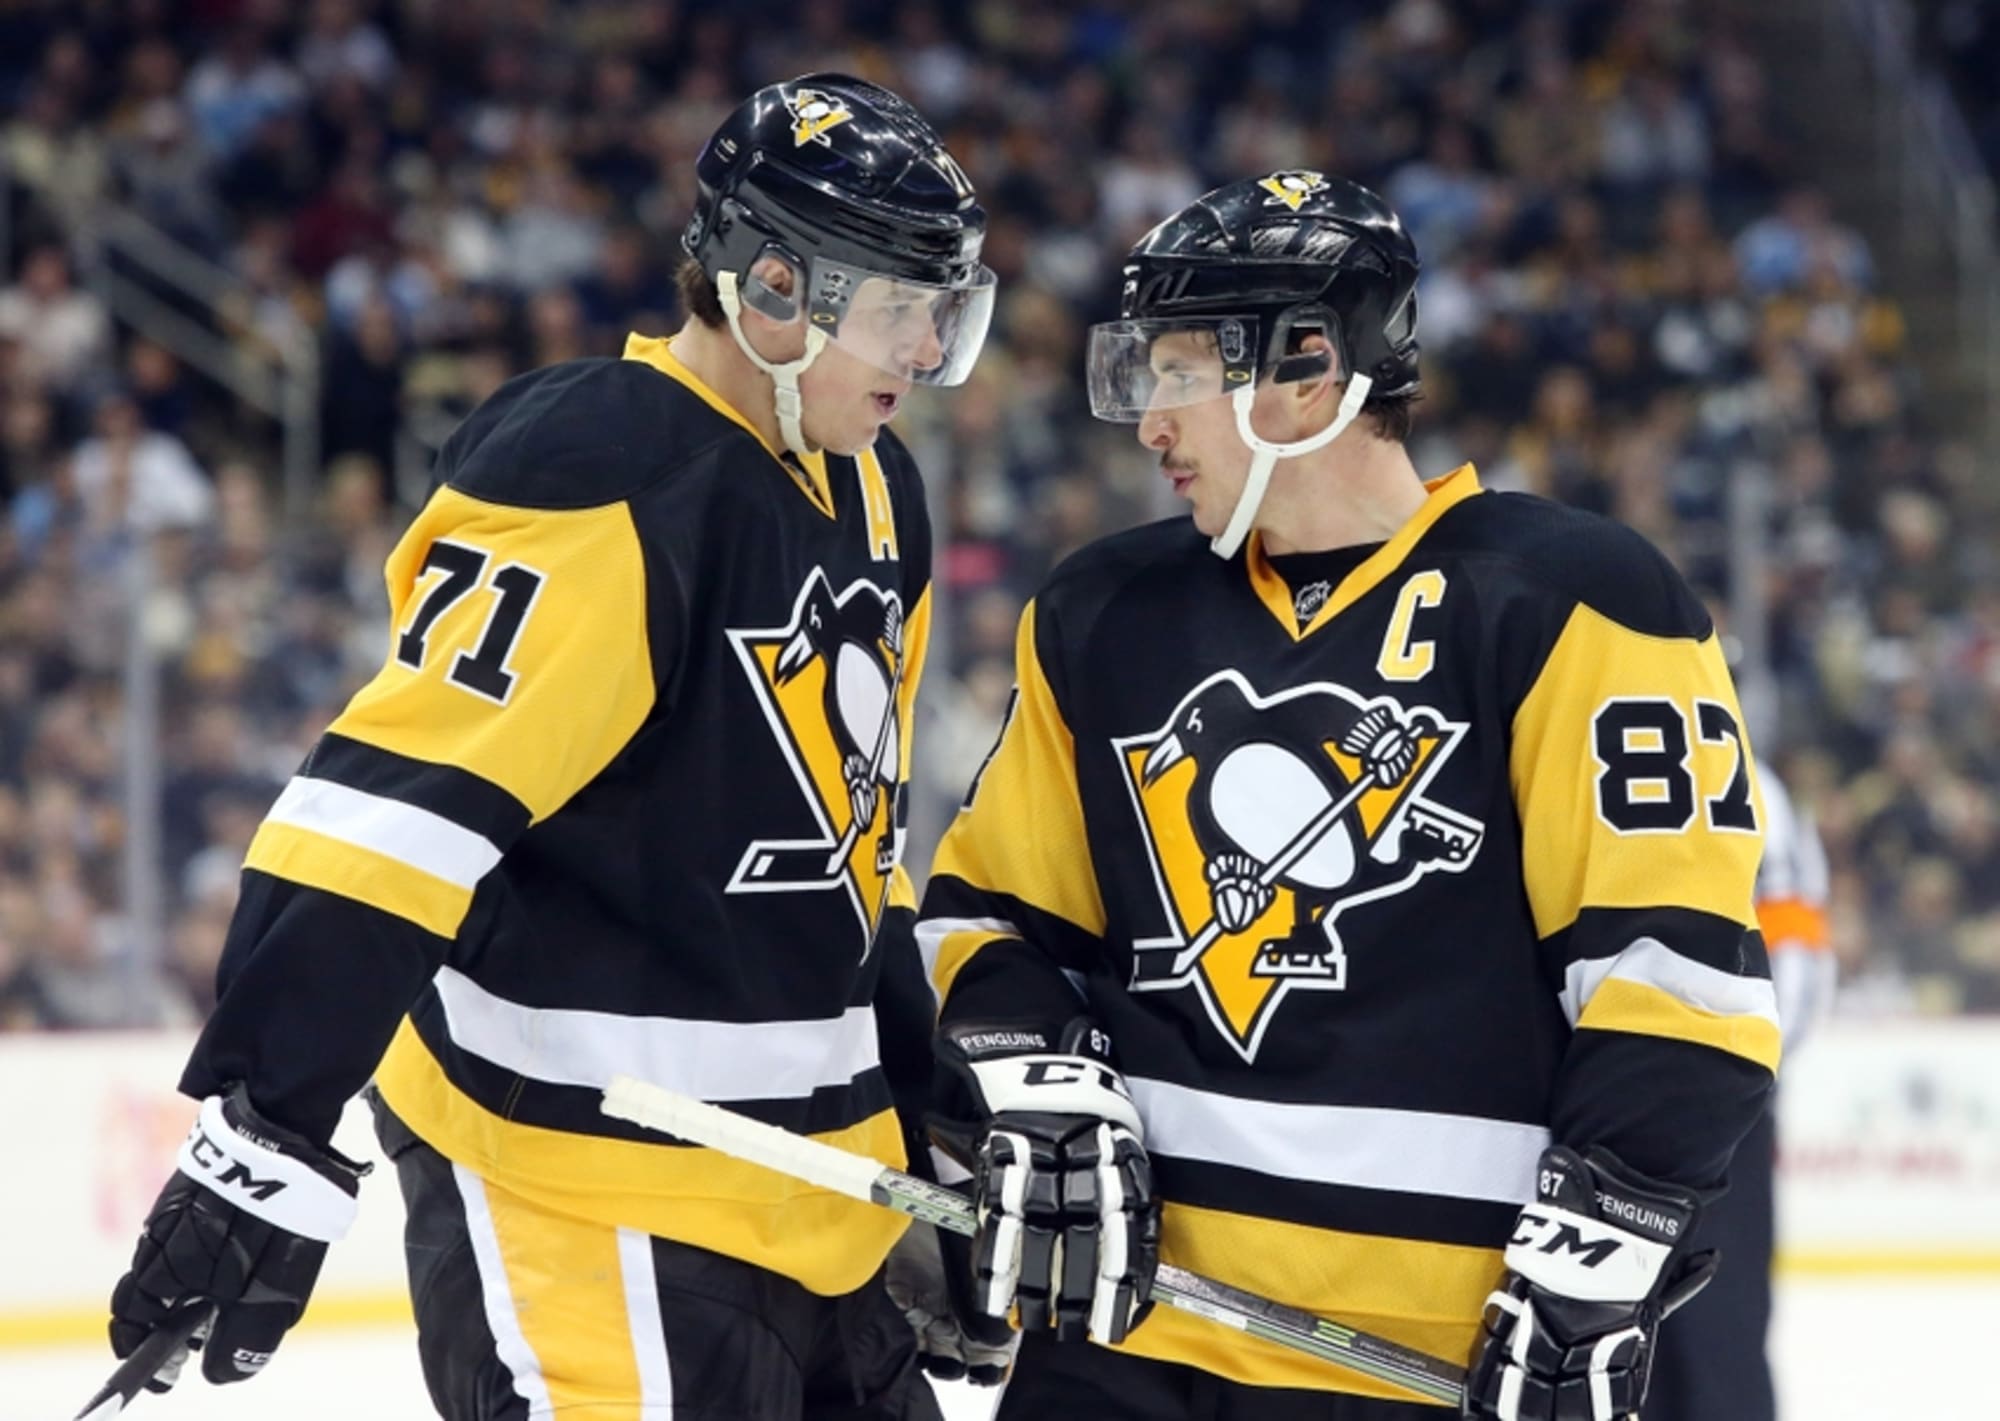 Sidney Crosby, 17 Seasons On, Is Ready to Wreck the N.H.L.